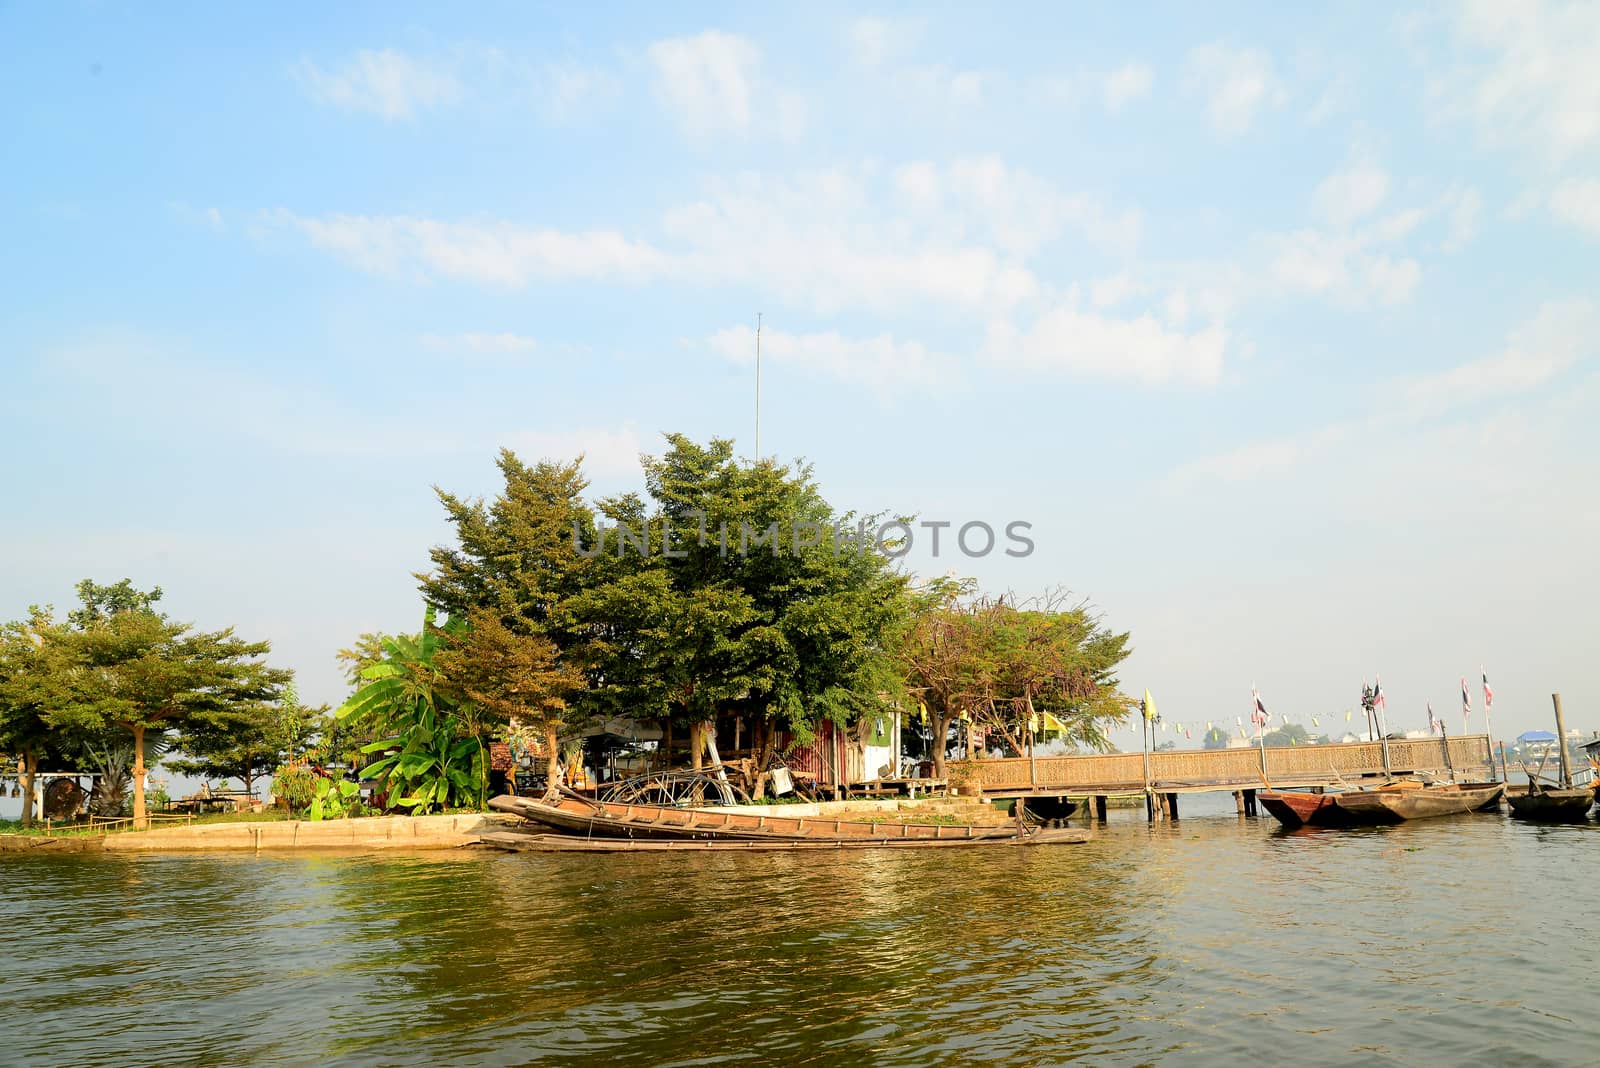  Phayao, Thailand – 21 December, 2019 : Wat Tilok Aram : Year-Old Underwater Temple of Thailand, Today a floating platform with the statue of a Buddha sits directly above the site of the sunken temple.